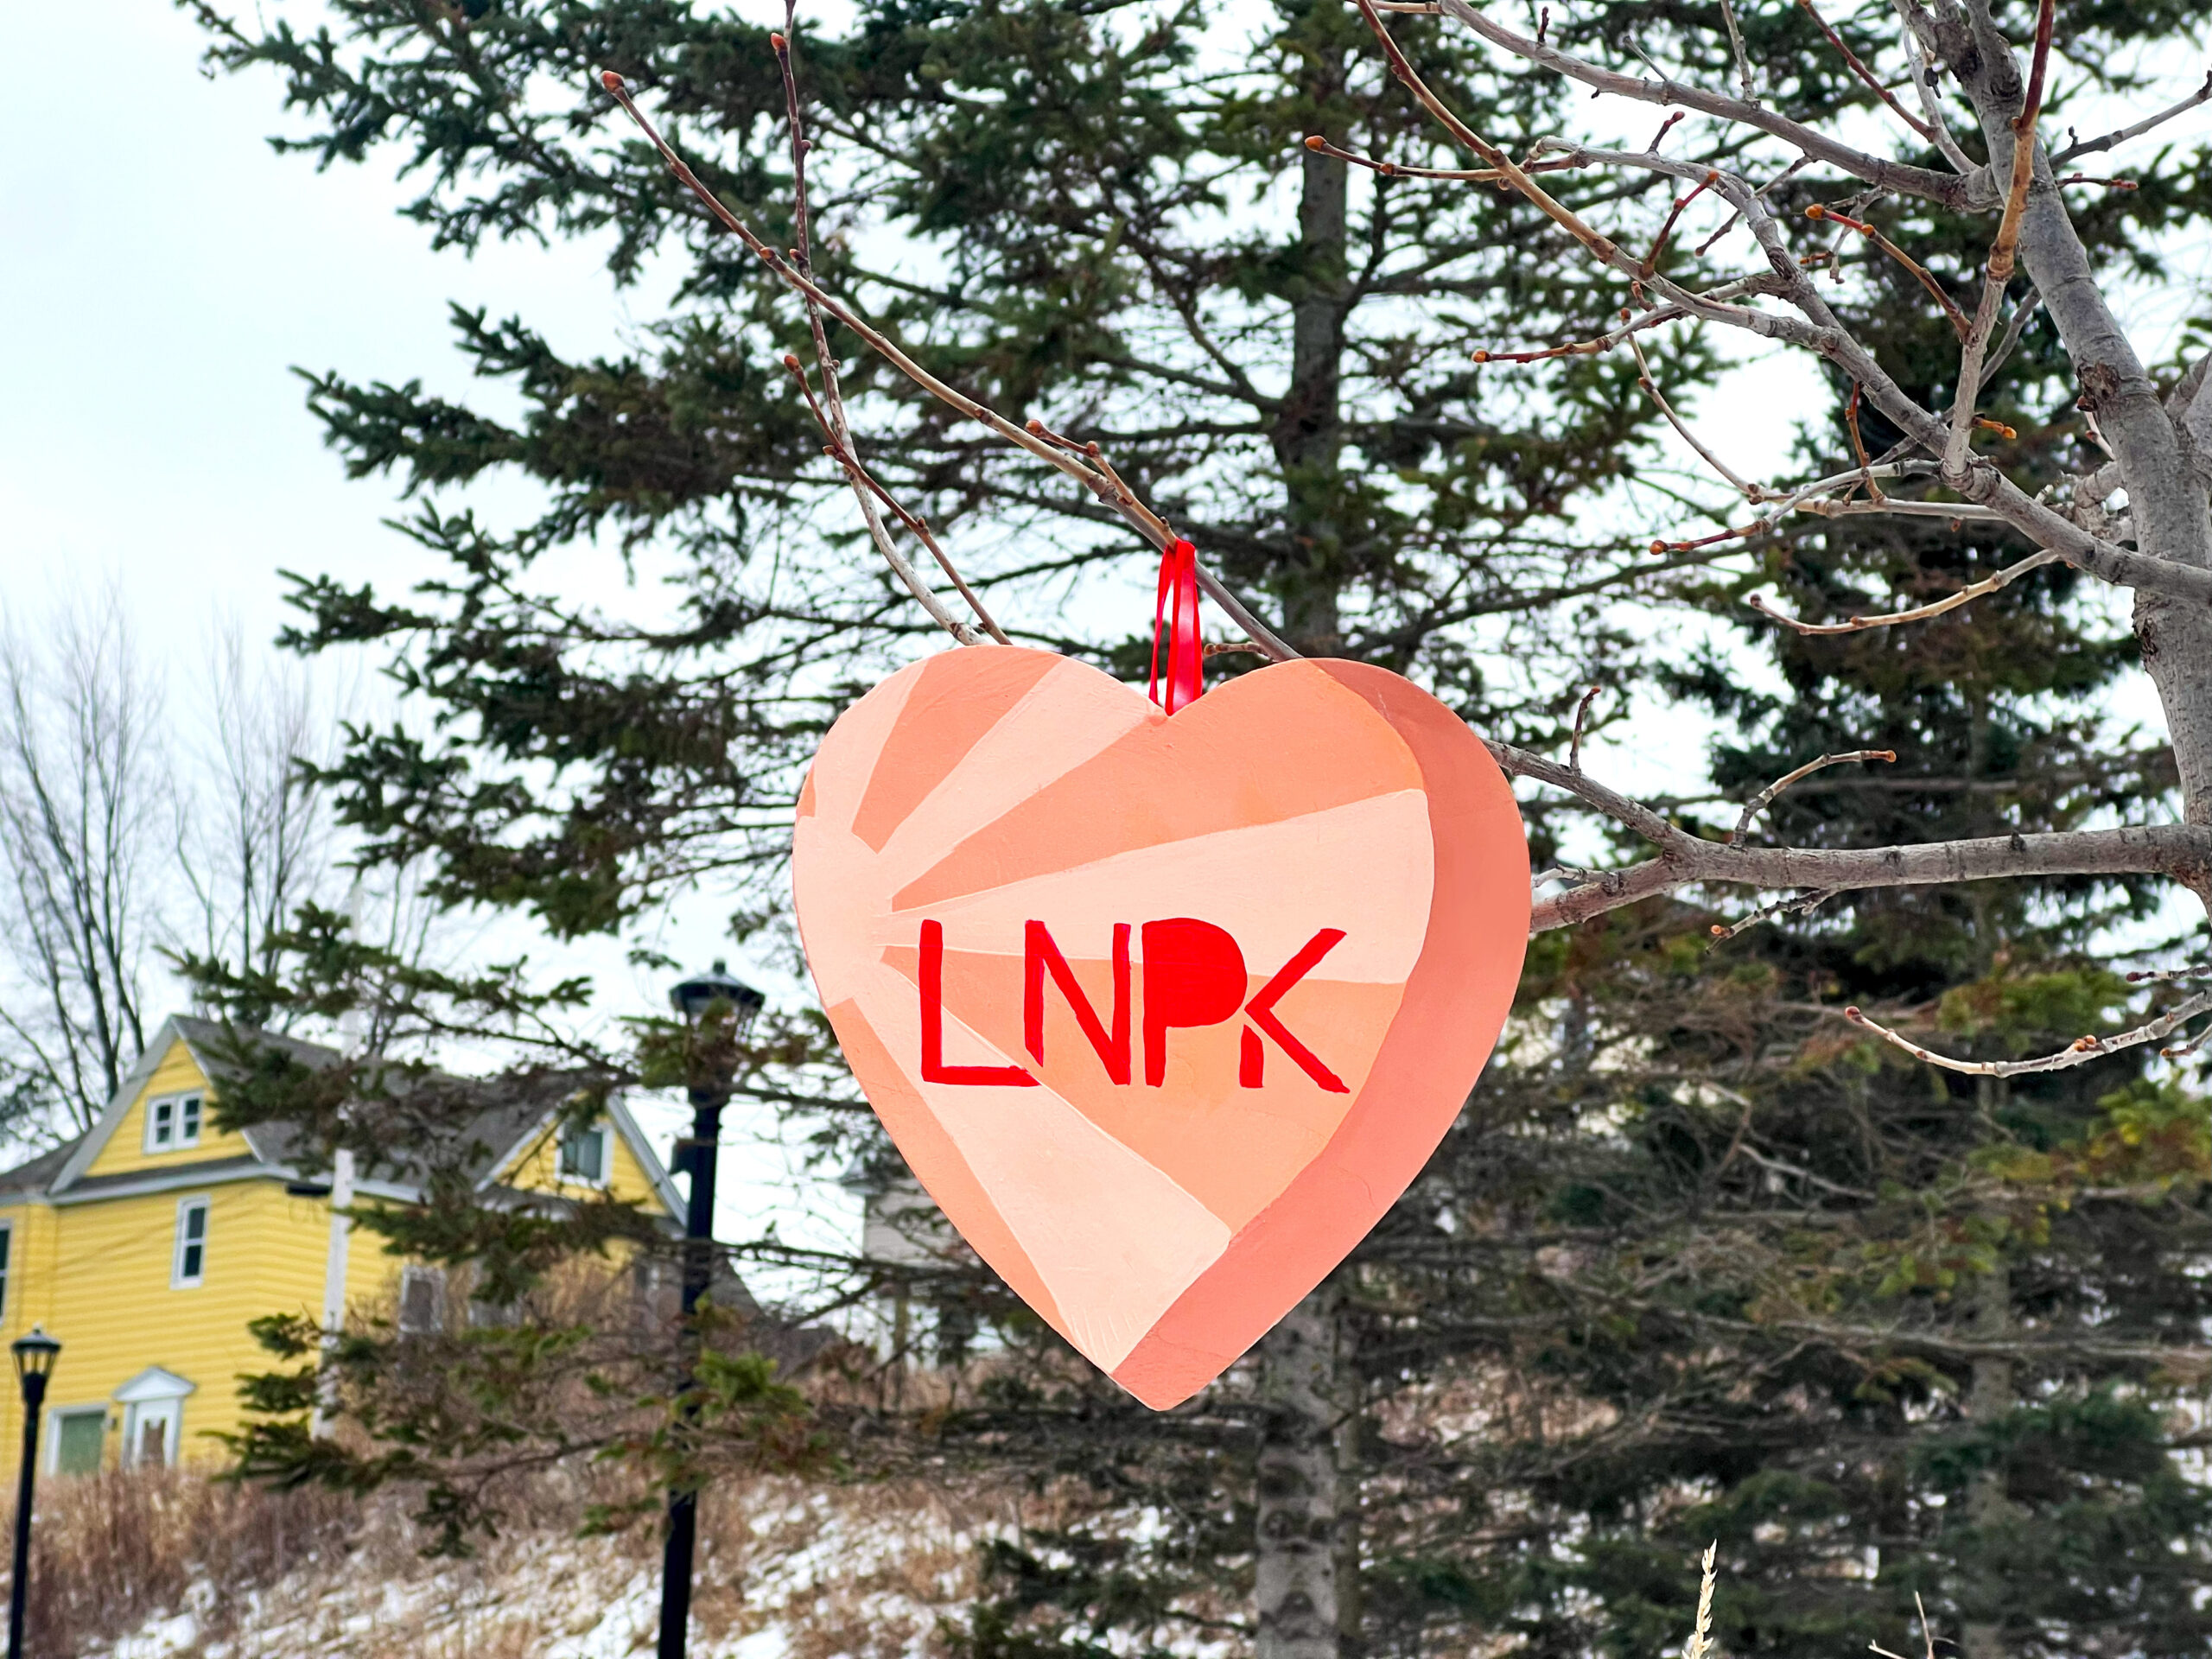 Light orange heart with sunburst pattern and "LNPK" in red hangs on a tree in front of a yellow house.